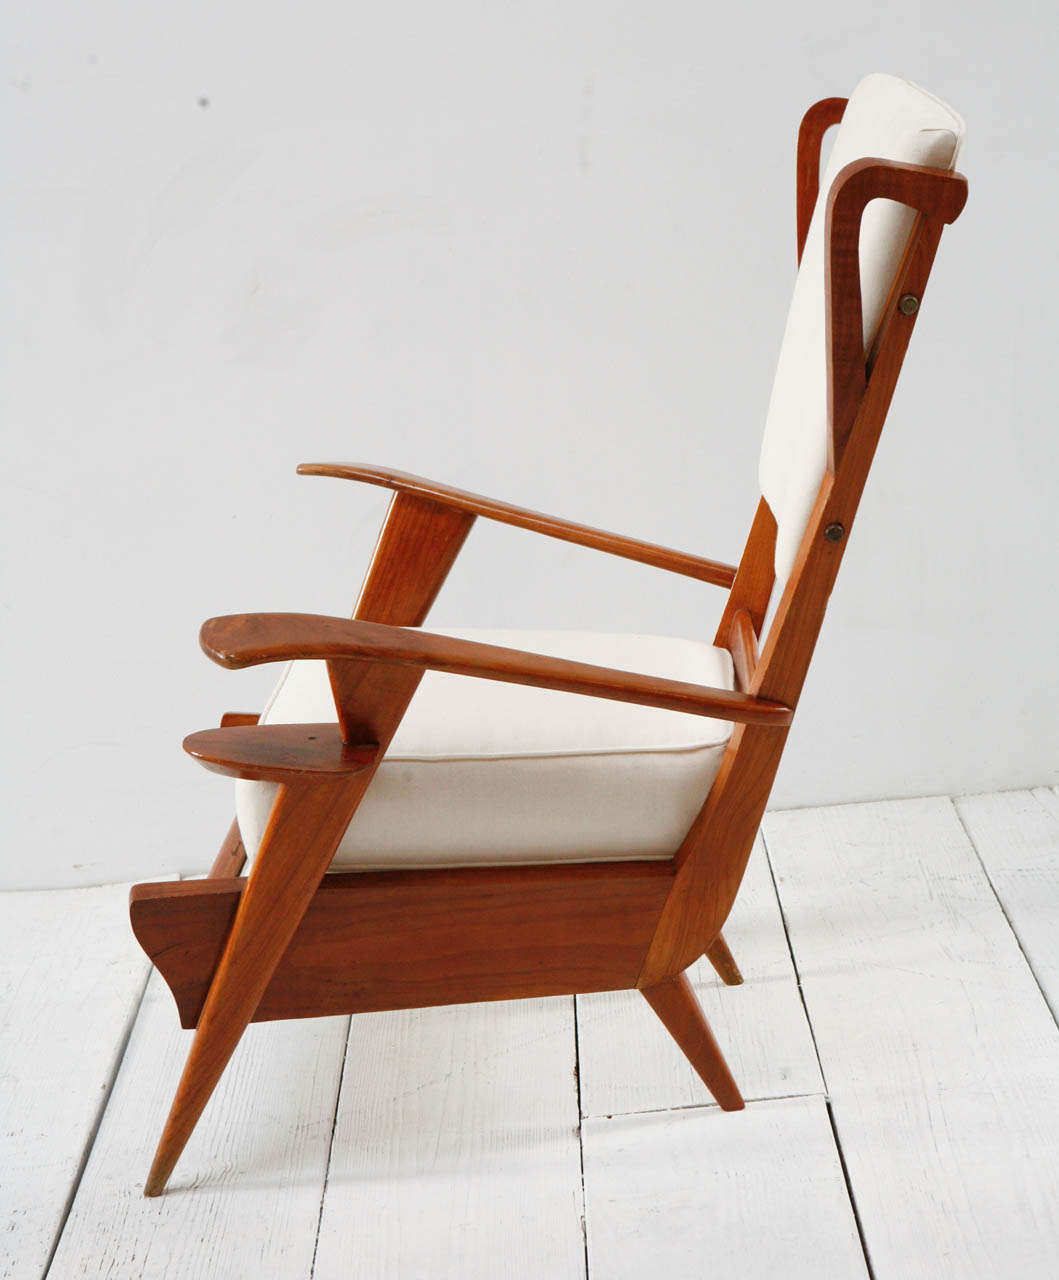 Pair of Italian Teak Viewing Chairs with Cup Holder 1